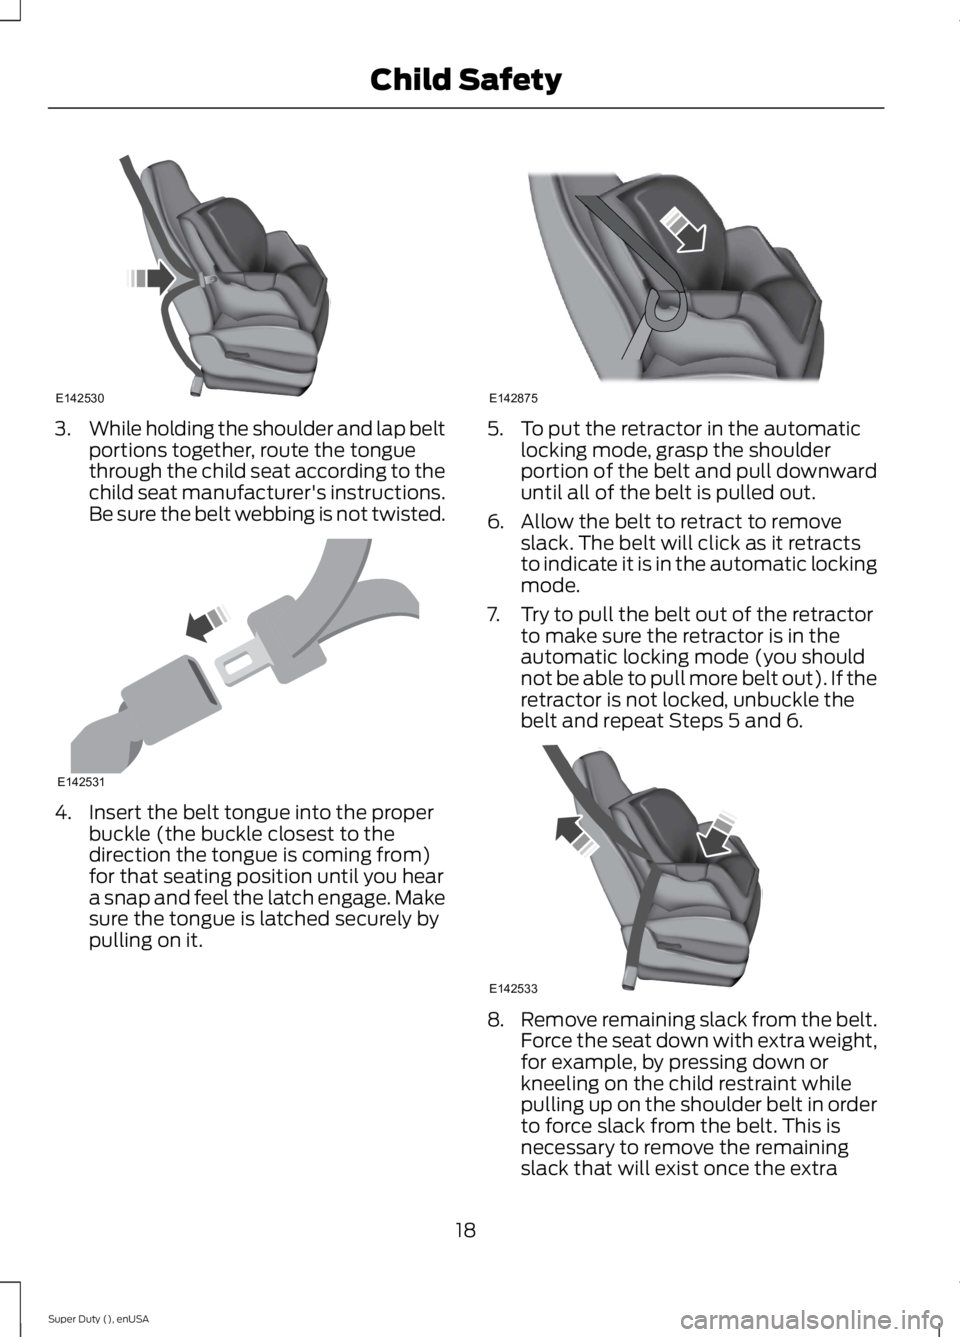 FORD F250 SUPER DUTY 2015  Owners Manual 3.While holding the shoulder and lap beltportions together, route the tonguethrough the child seat according to thechild seat manufacturer's instructions.Be sure the belt webbing is not twisted.
4